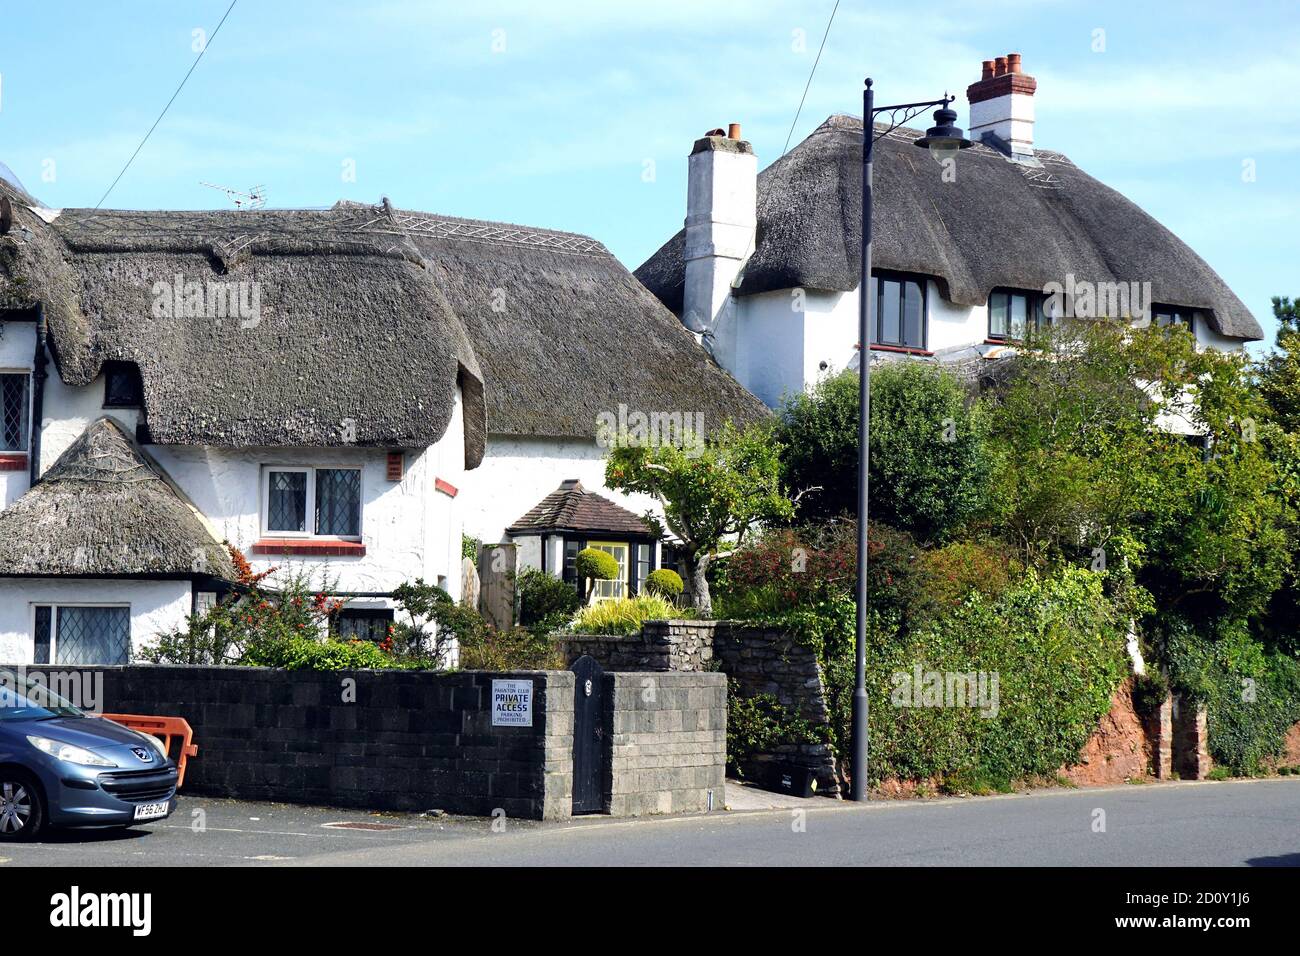 Paignton, Devon, UK. September 18, 2020. Two beautiful white and thatched cottages on the harbor at Paignton in Devon, UK. Stock Photo